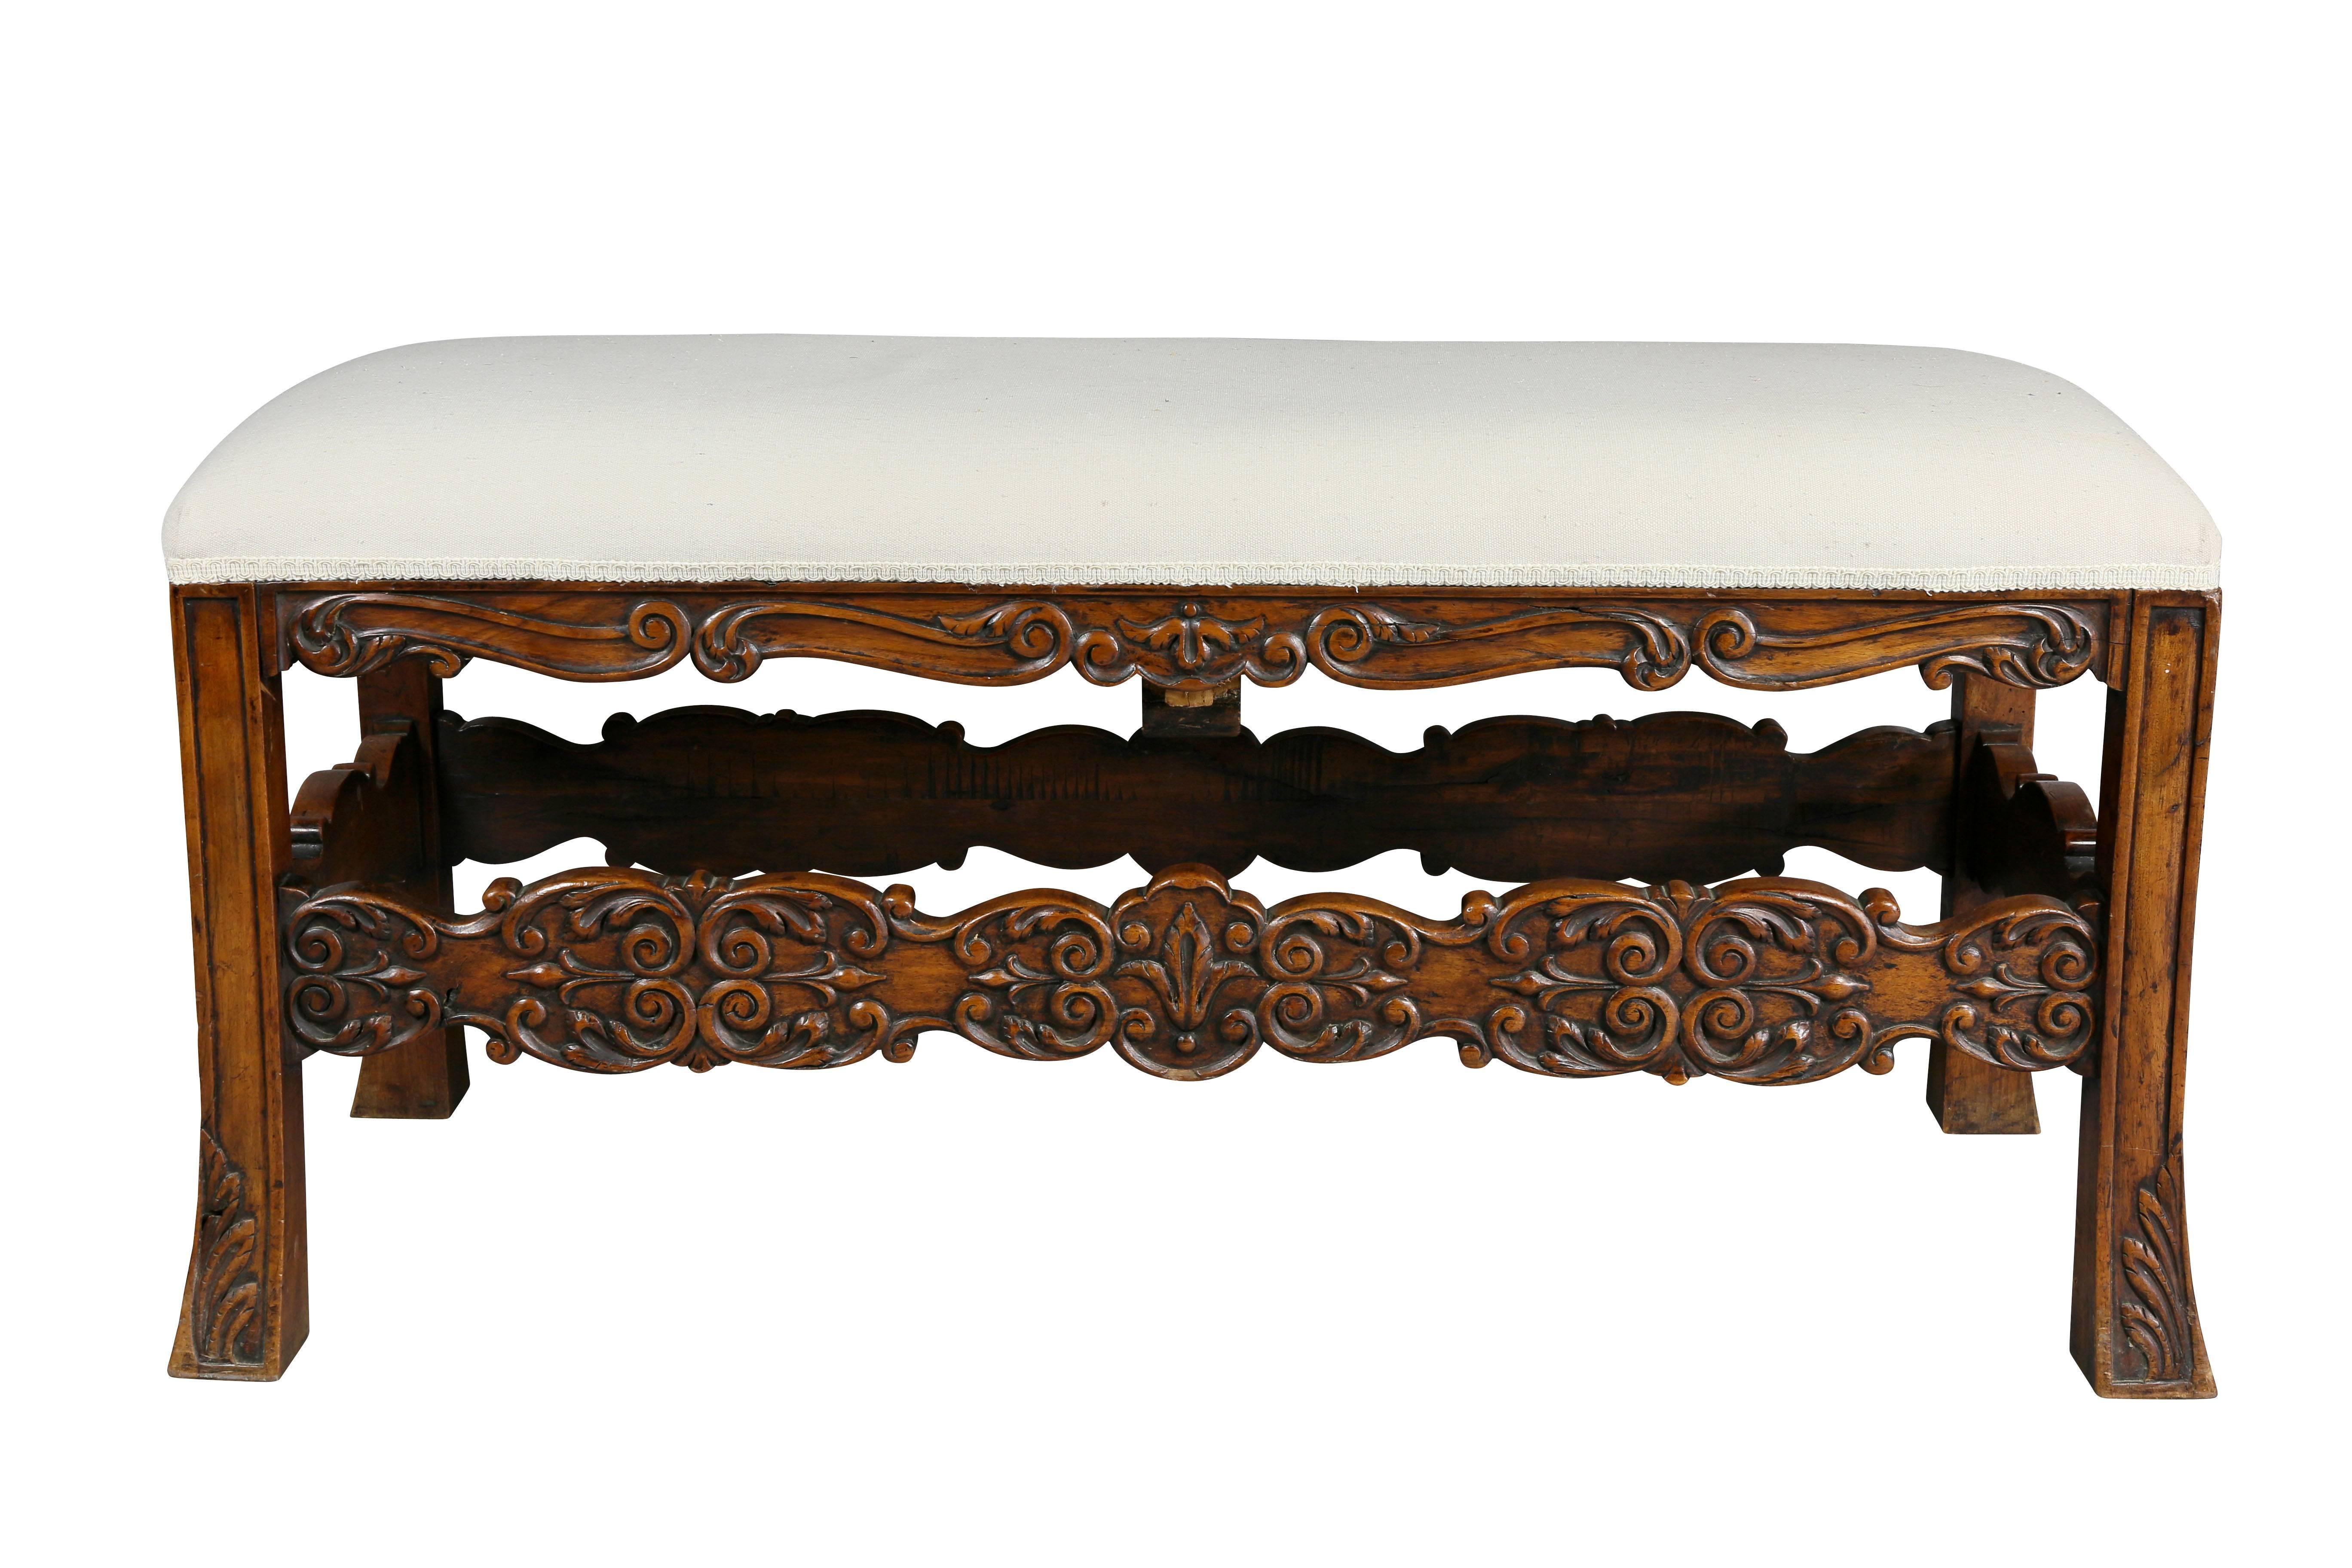 With rectangular upholstered top over a carved frame and carved stretchers ending on slightly flared square legs.